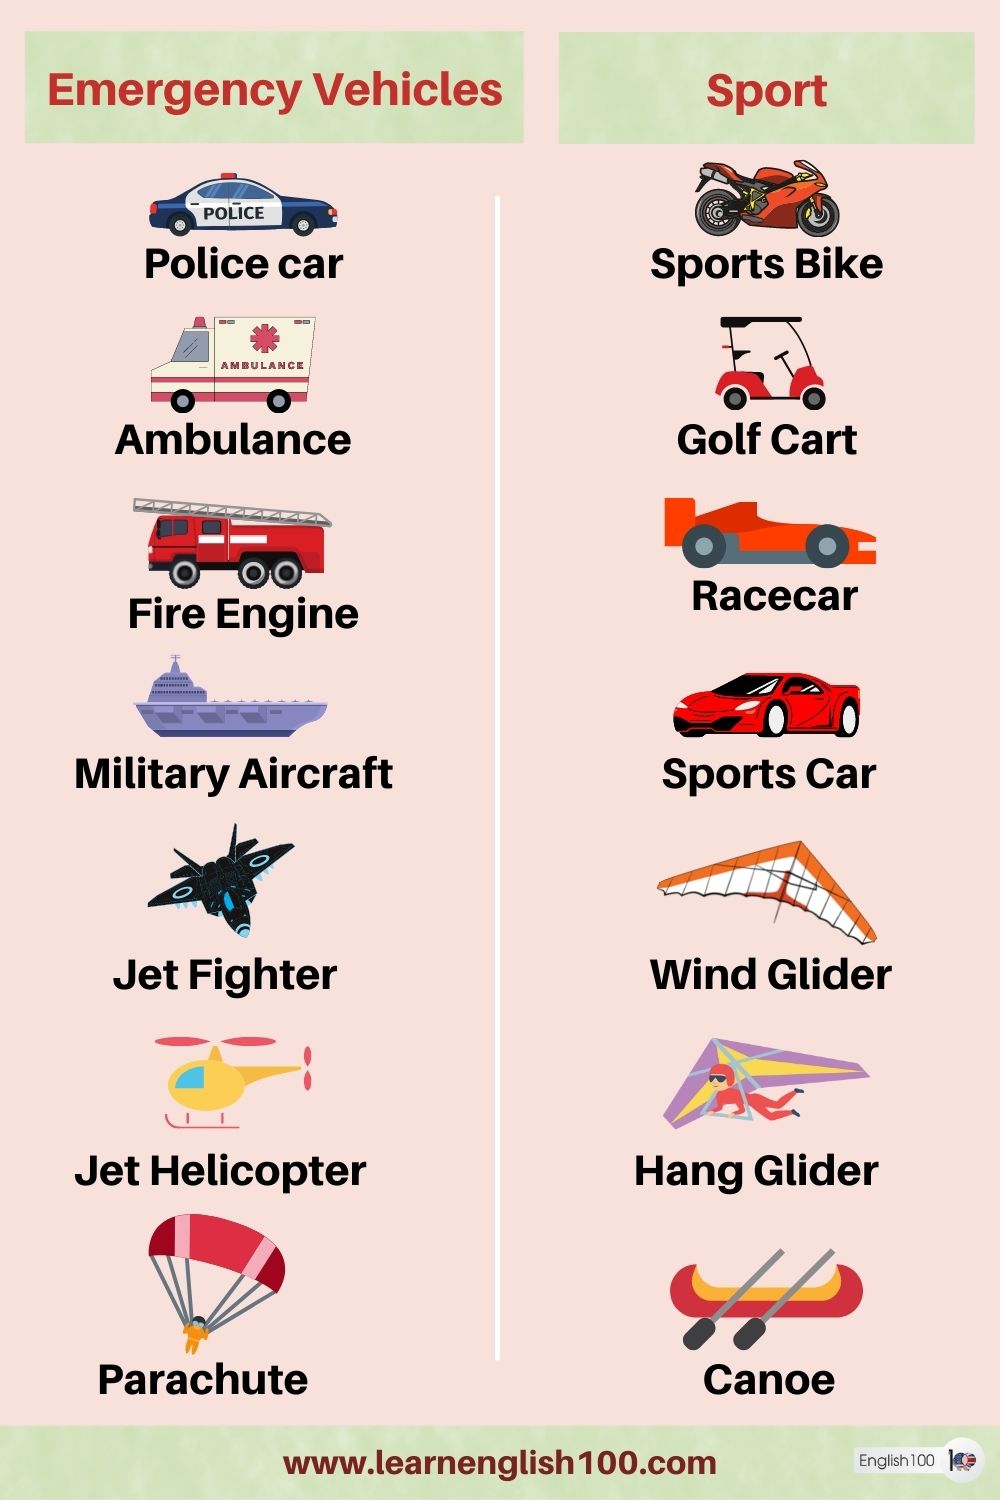 Transport Vehicles' Names and Types